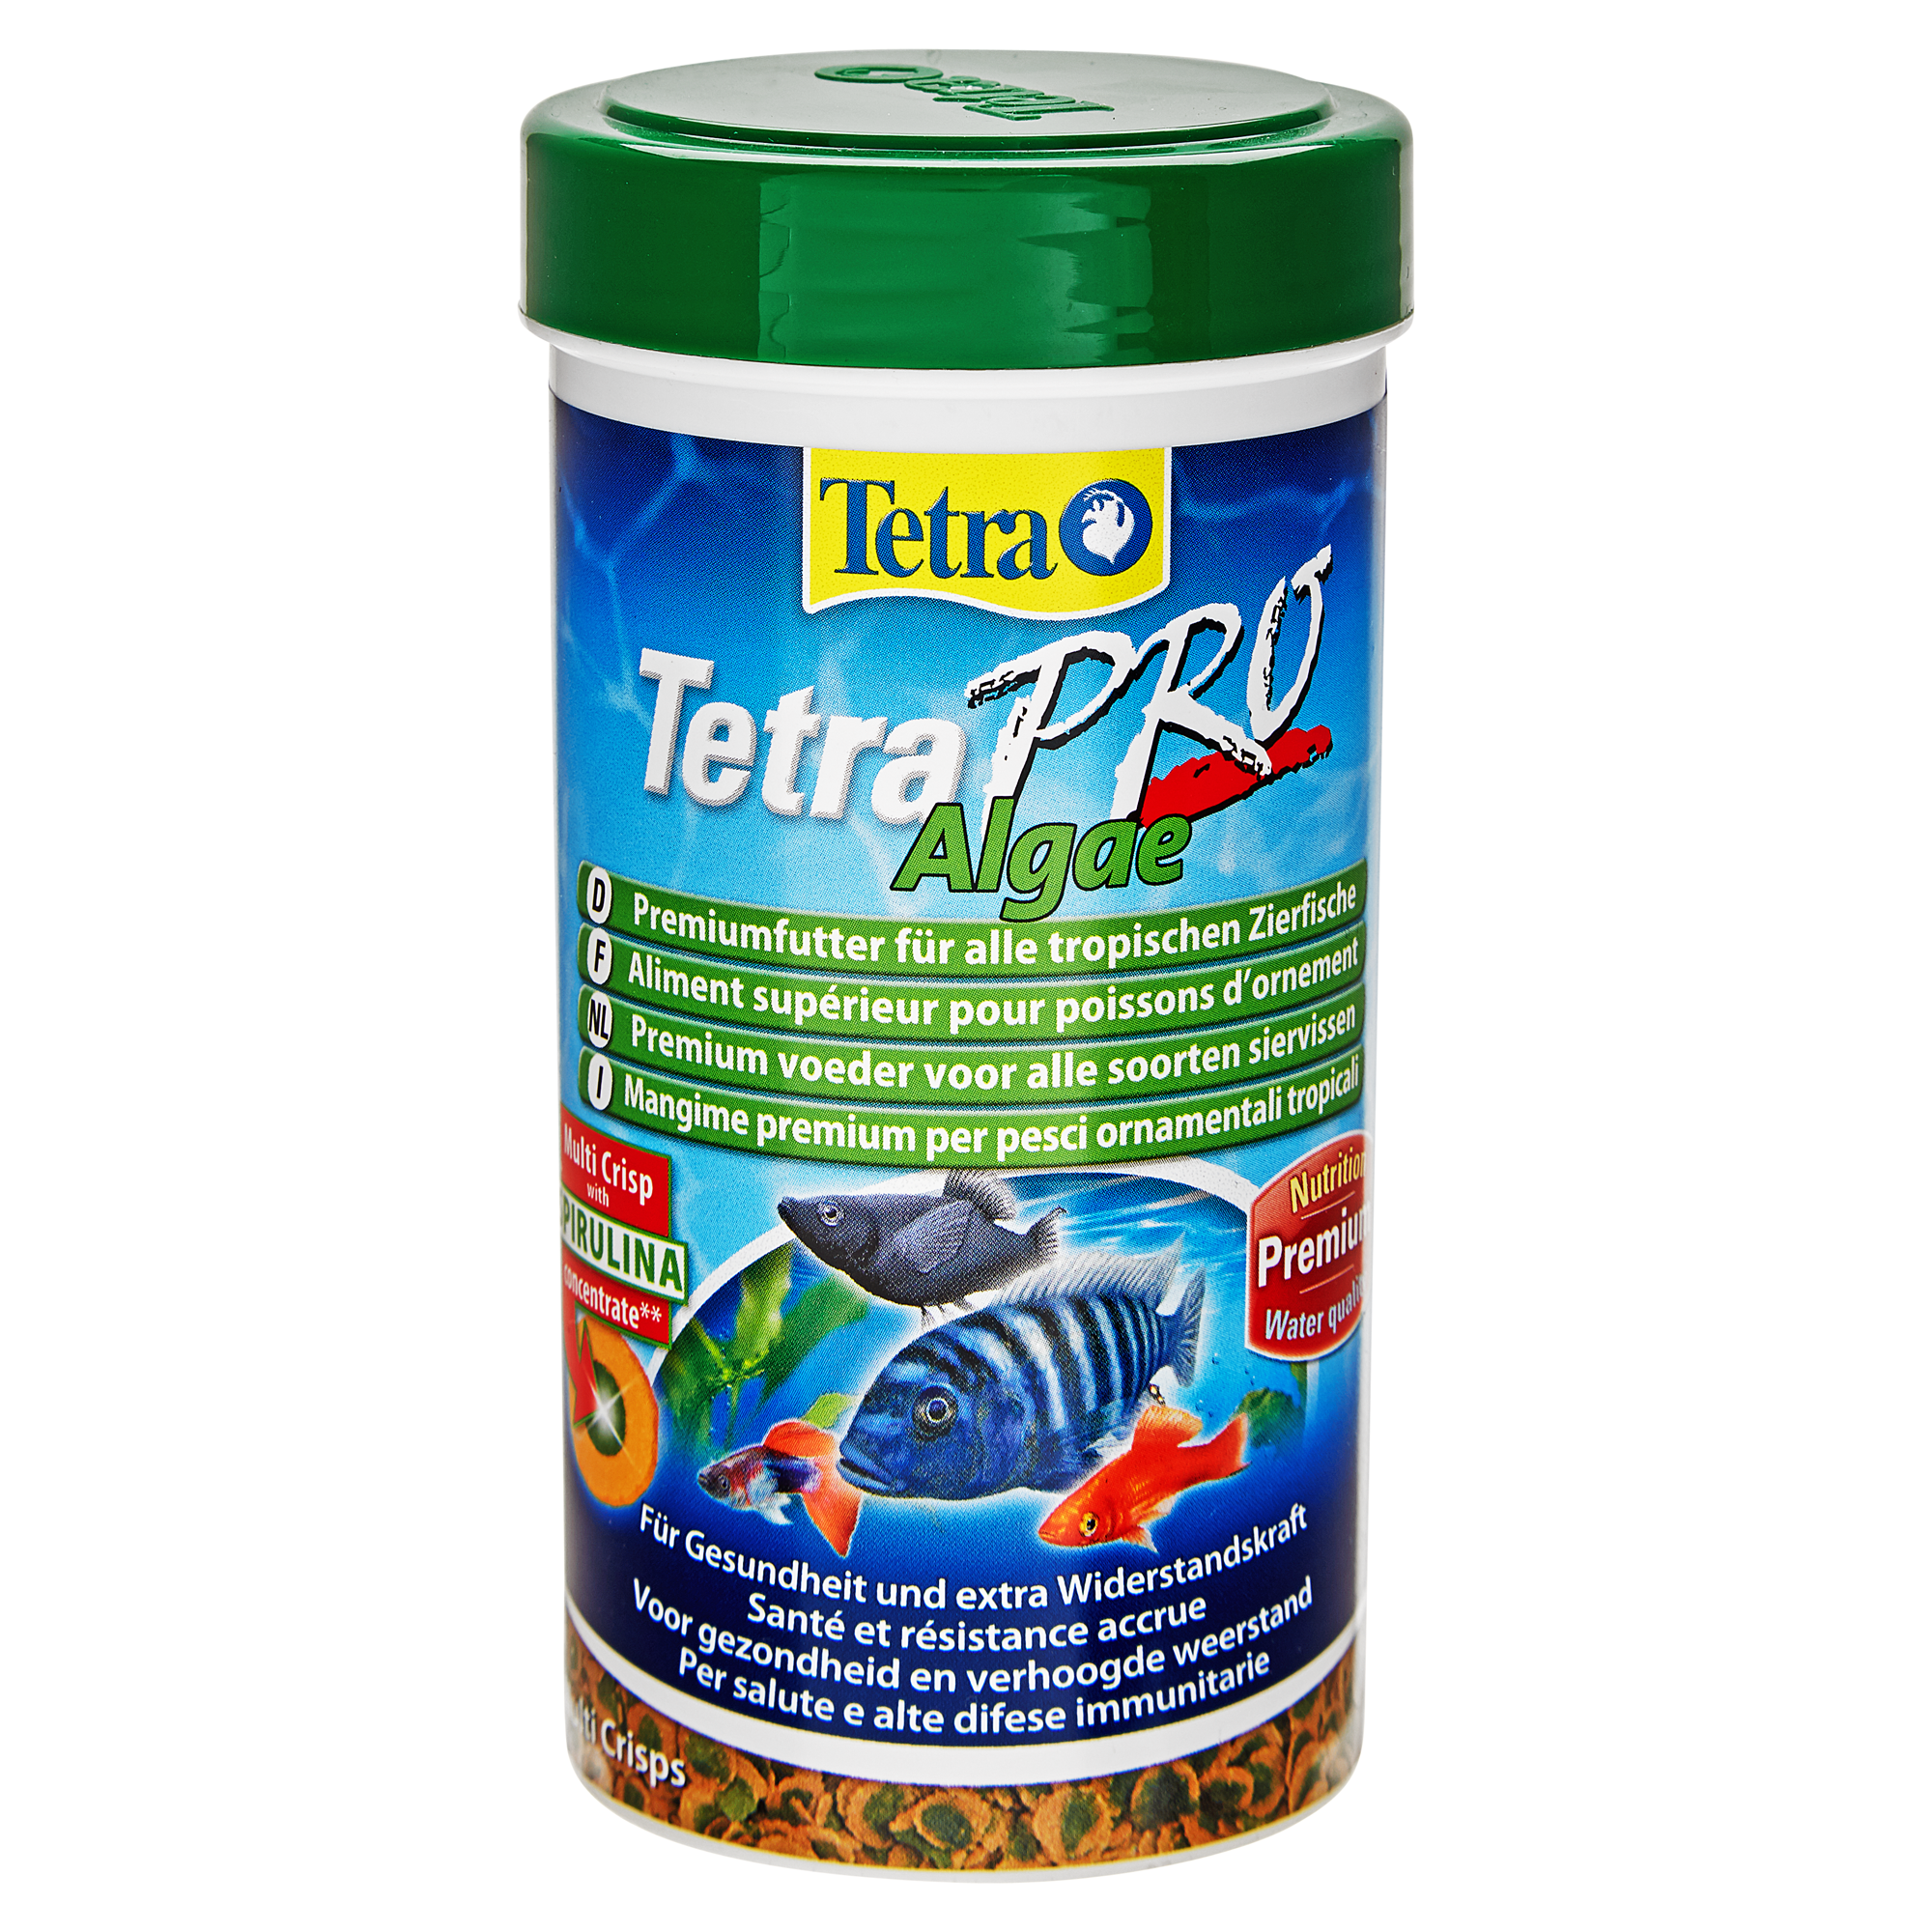 Fischfutter "Pro" Tetra Algae 45 g + product picture